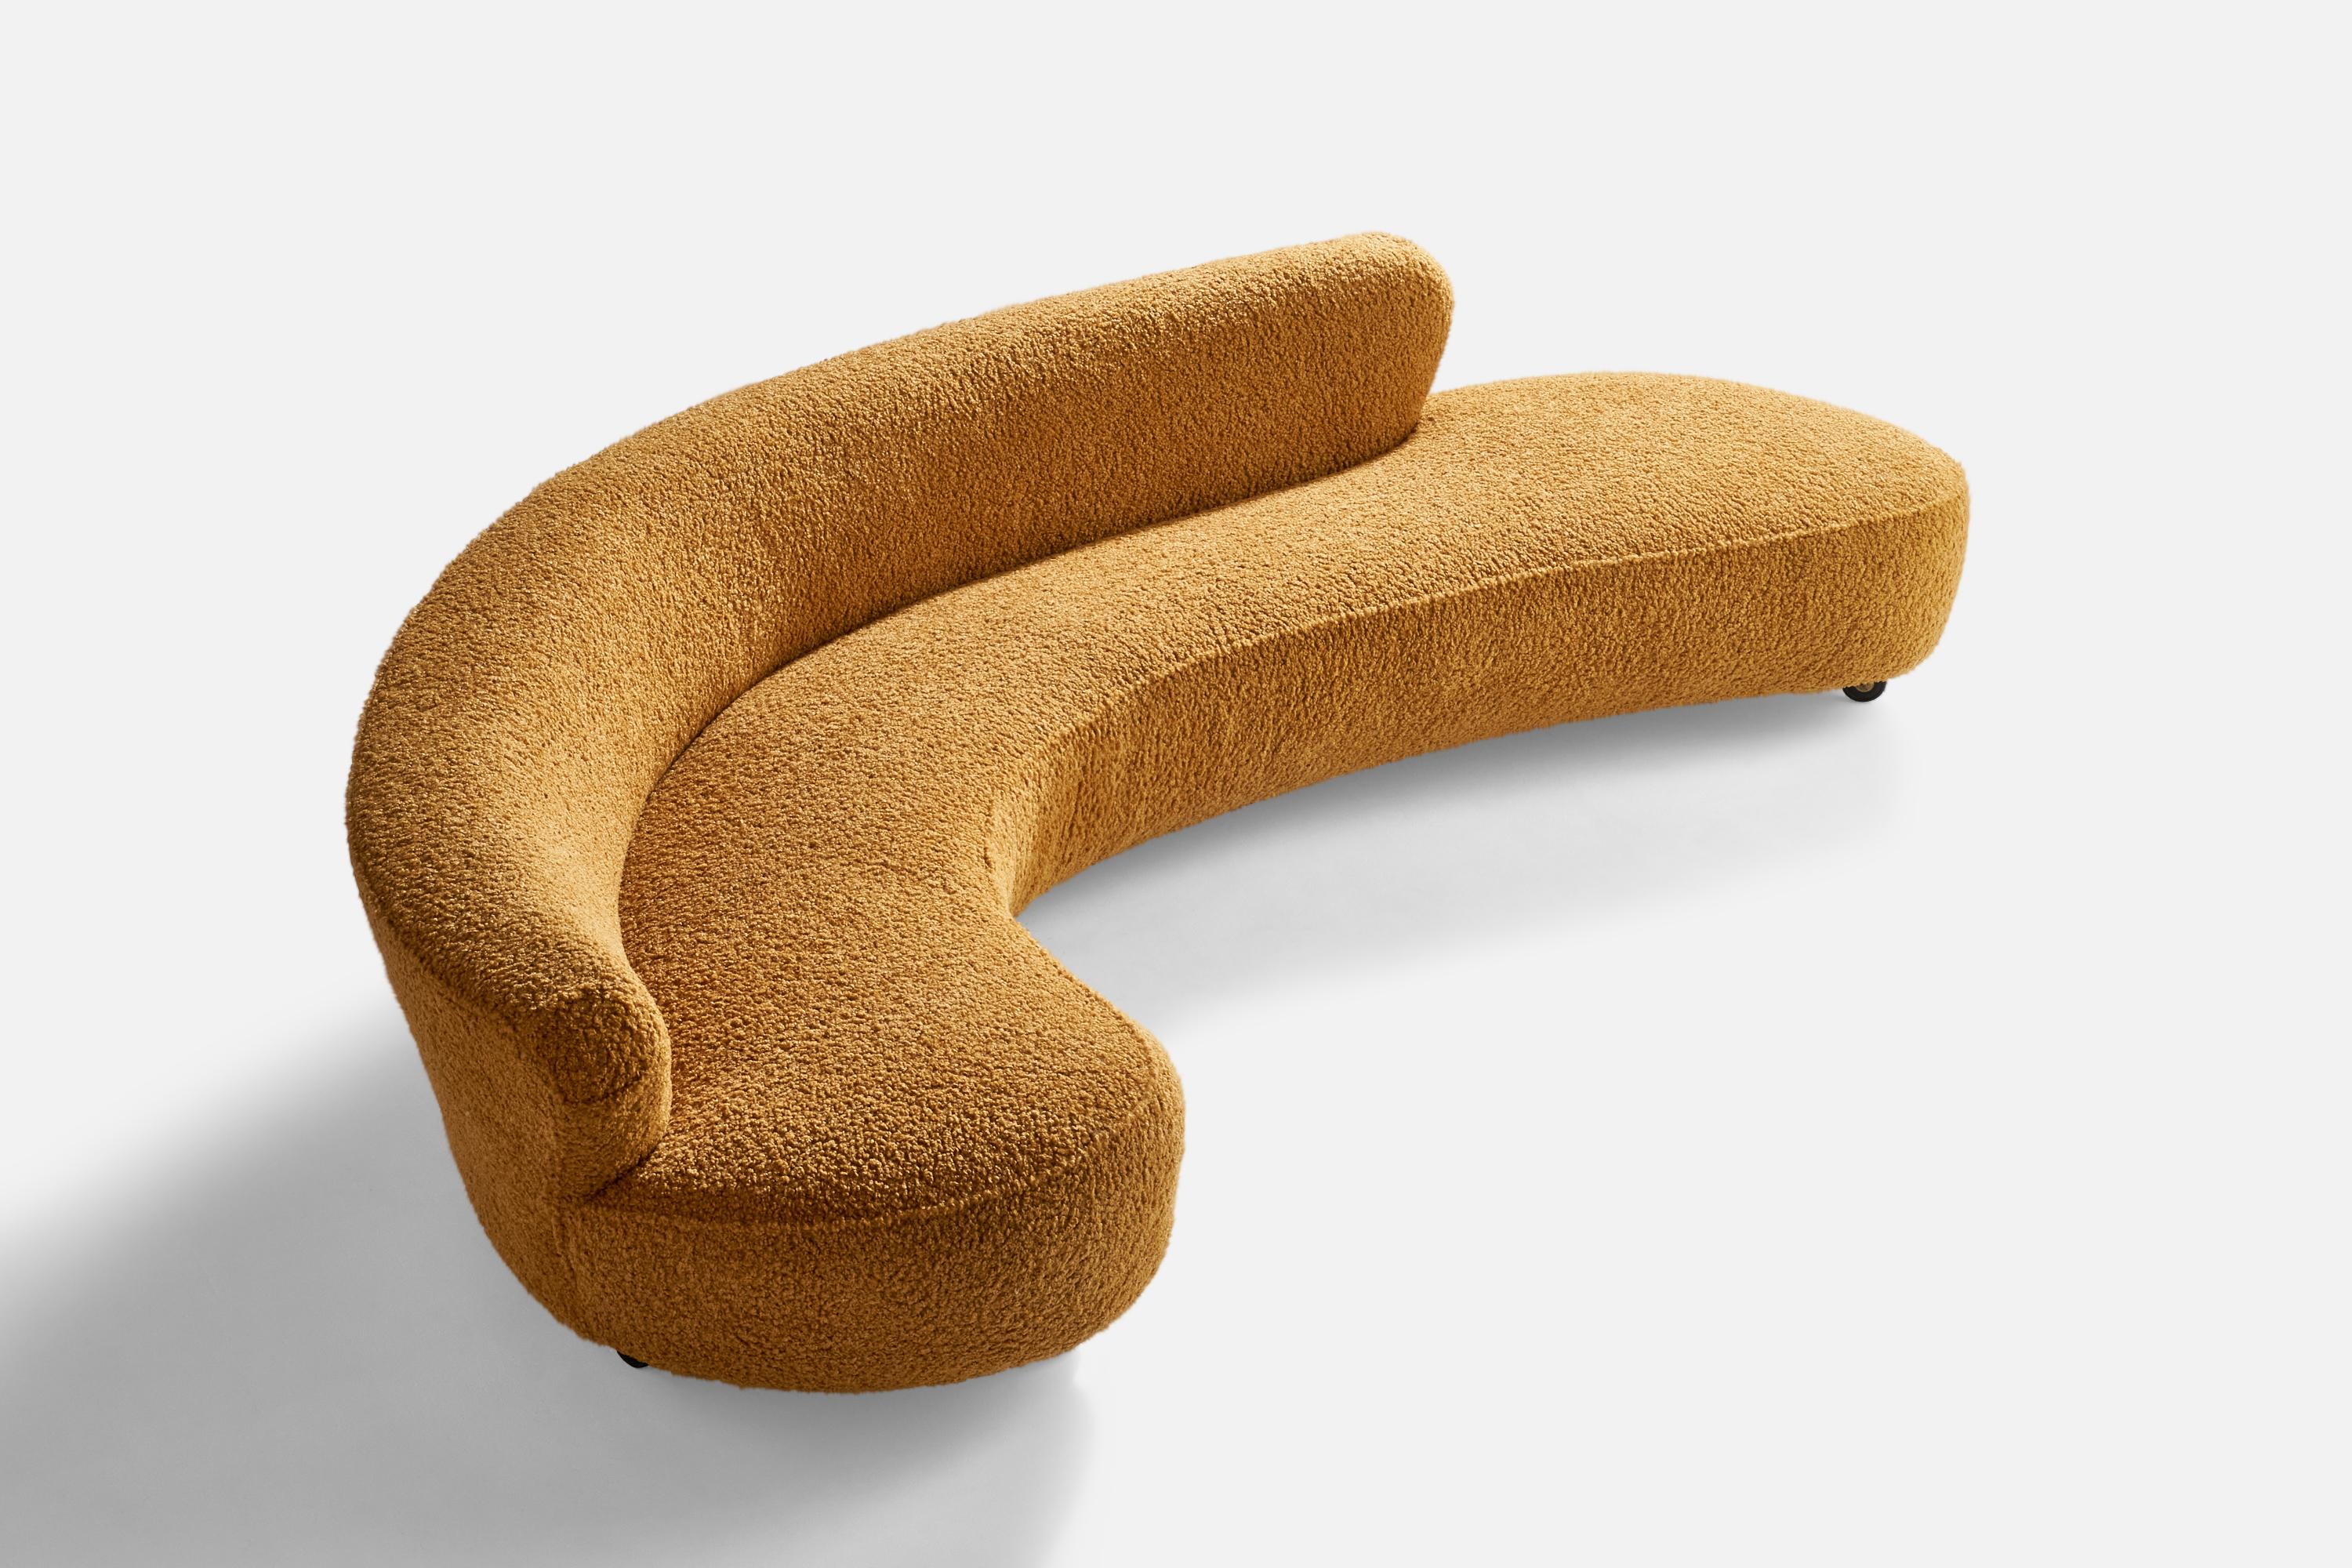 A large curved beige yellow bouclé fabric and metal sofa designed by Vladimir Kagan and produced by Kagan-Dreyfuss Inc. 

Seat height: 15.5”

Reupholstered in brand new bouclé fabric.